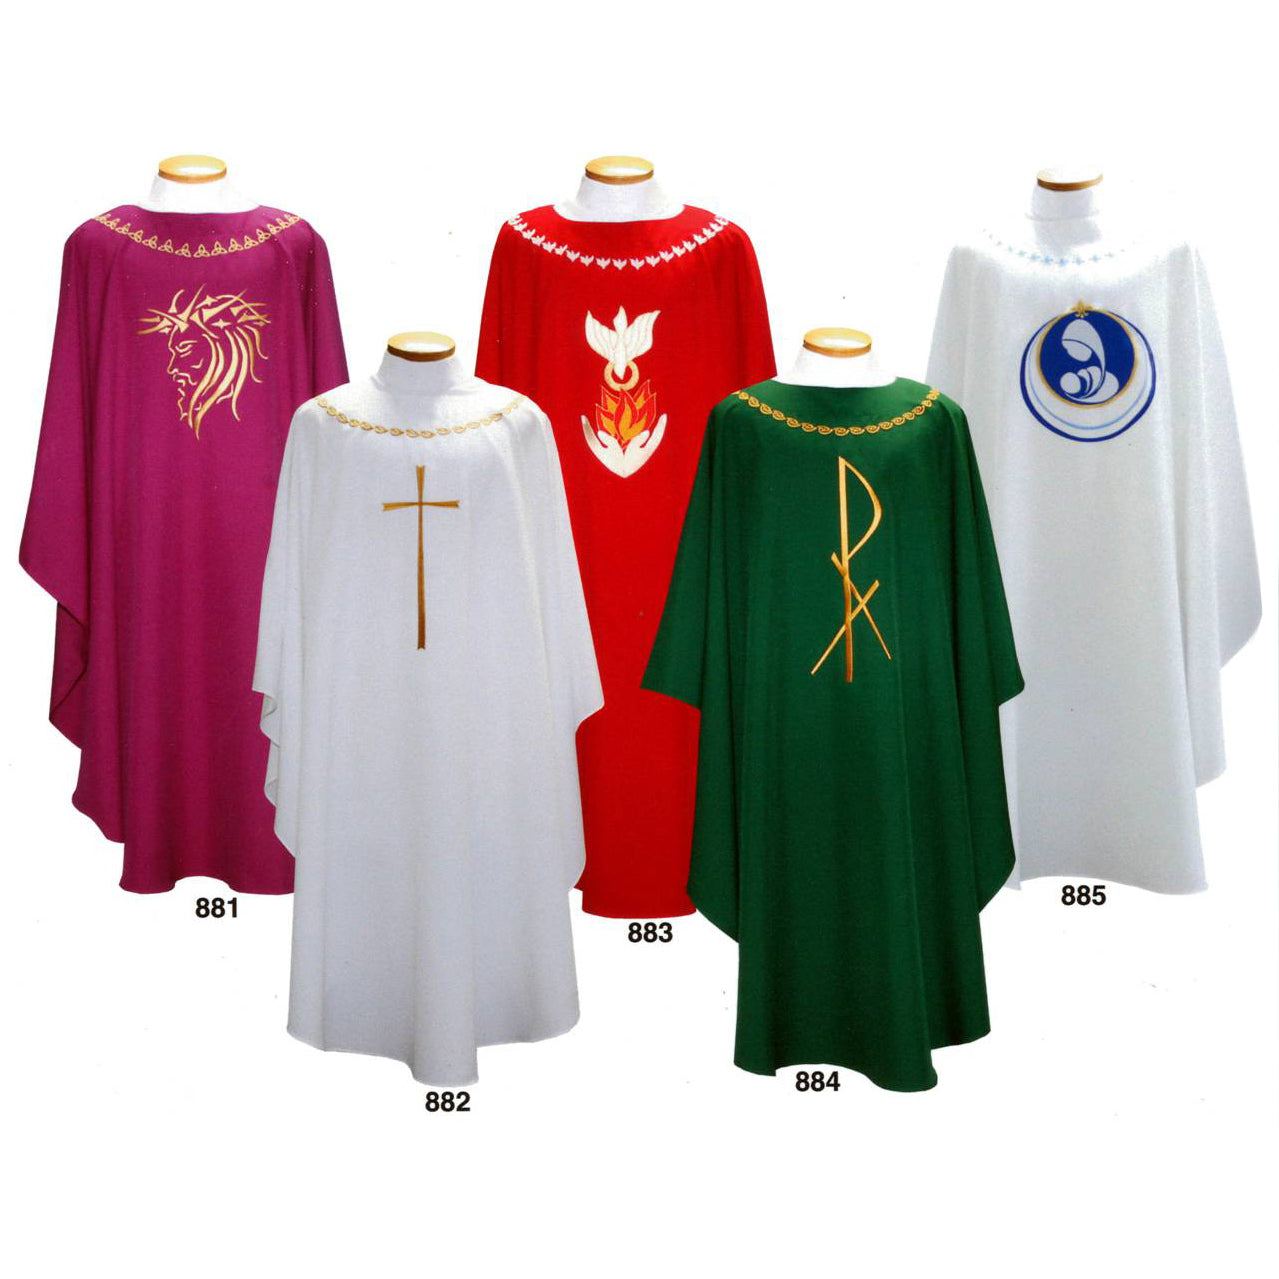 beauveste-embroidered-chasubles.jpg